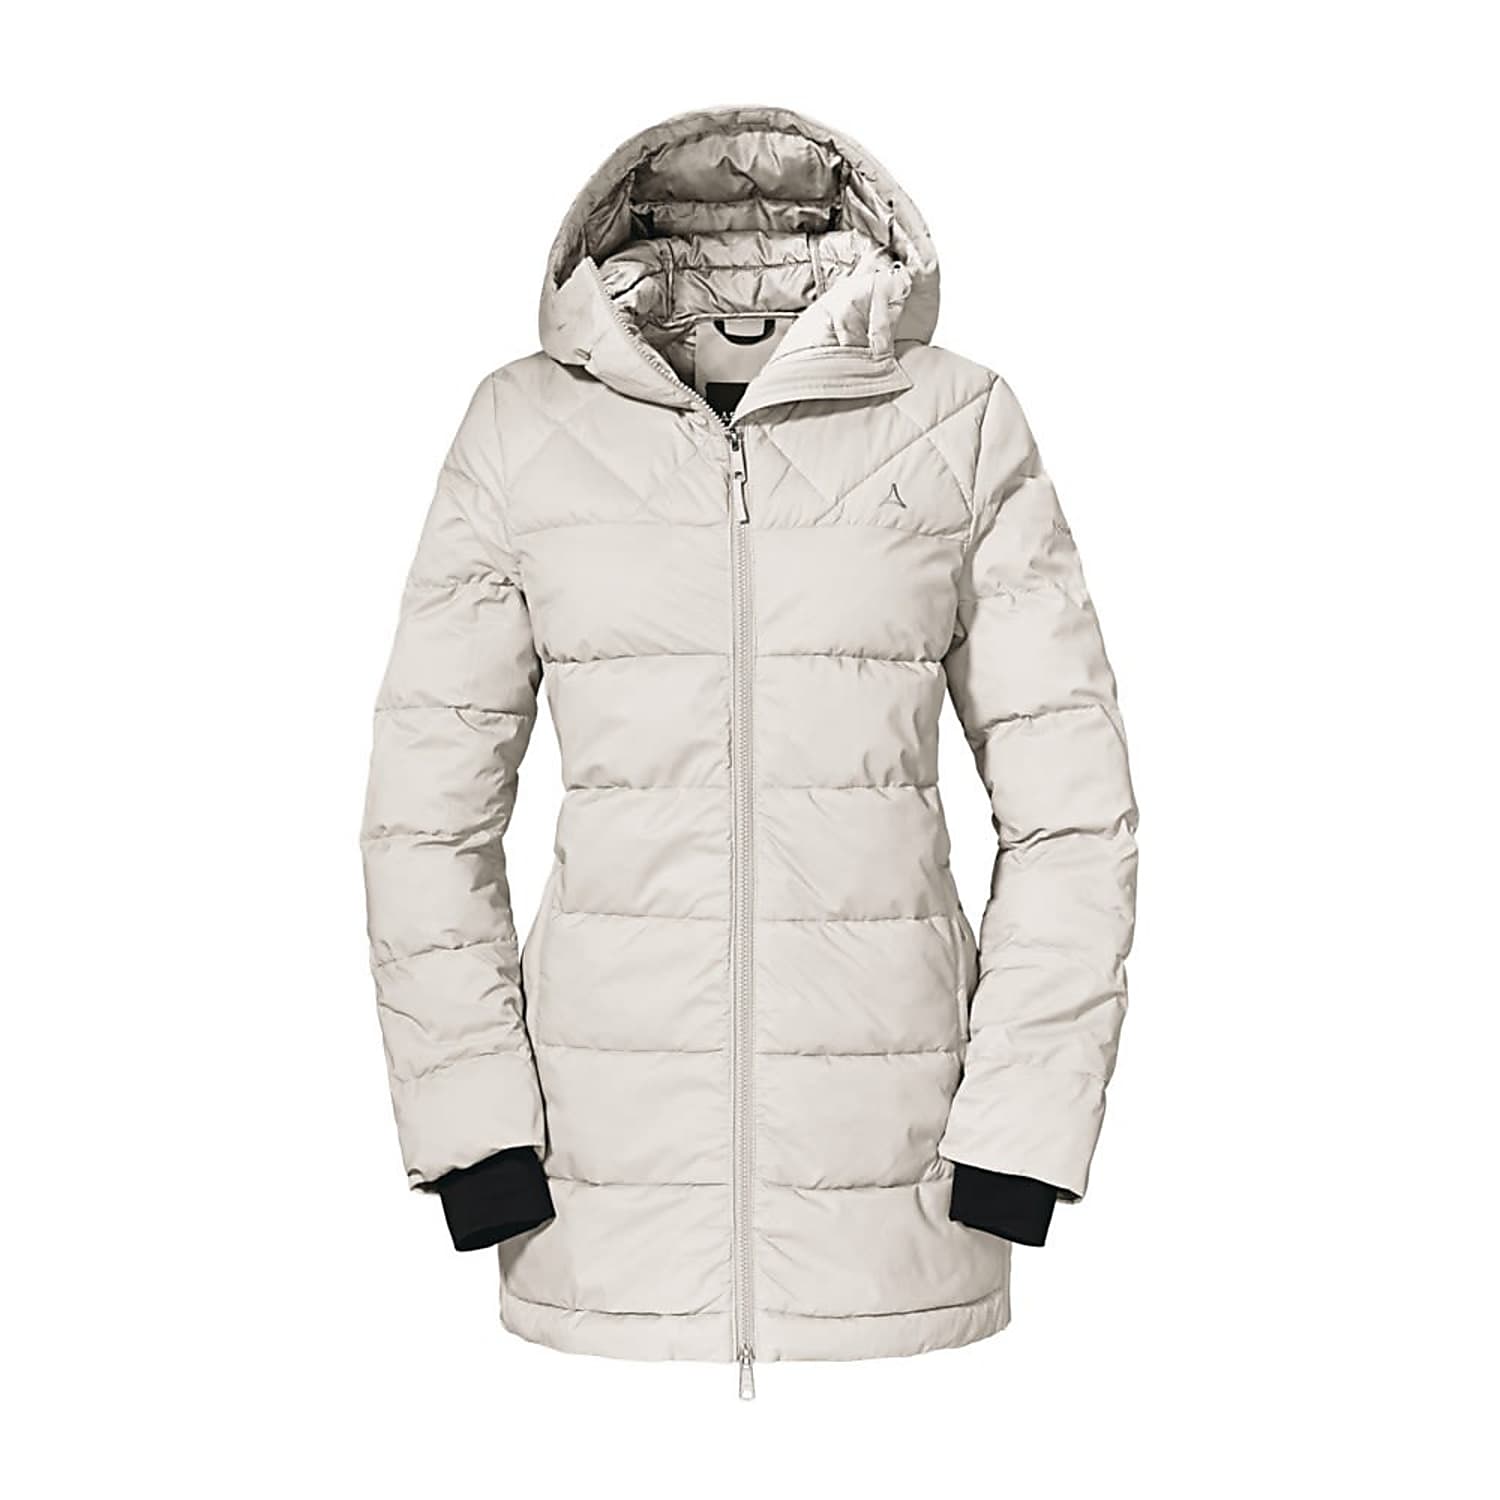 W BOSTON, - Schoeffel White PARKA INSULATED Whisper and Fast cheap shipping